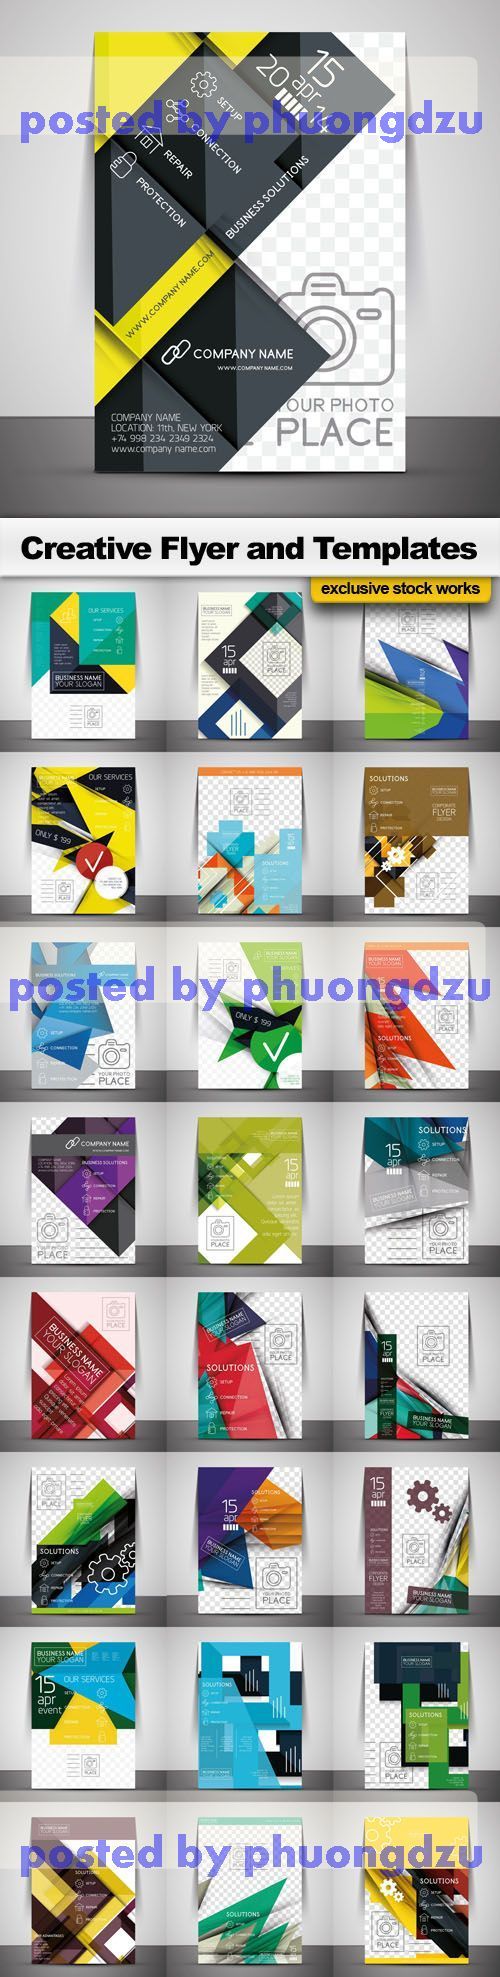 Creative Flyer and Templates Vector coletion part 1